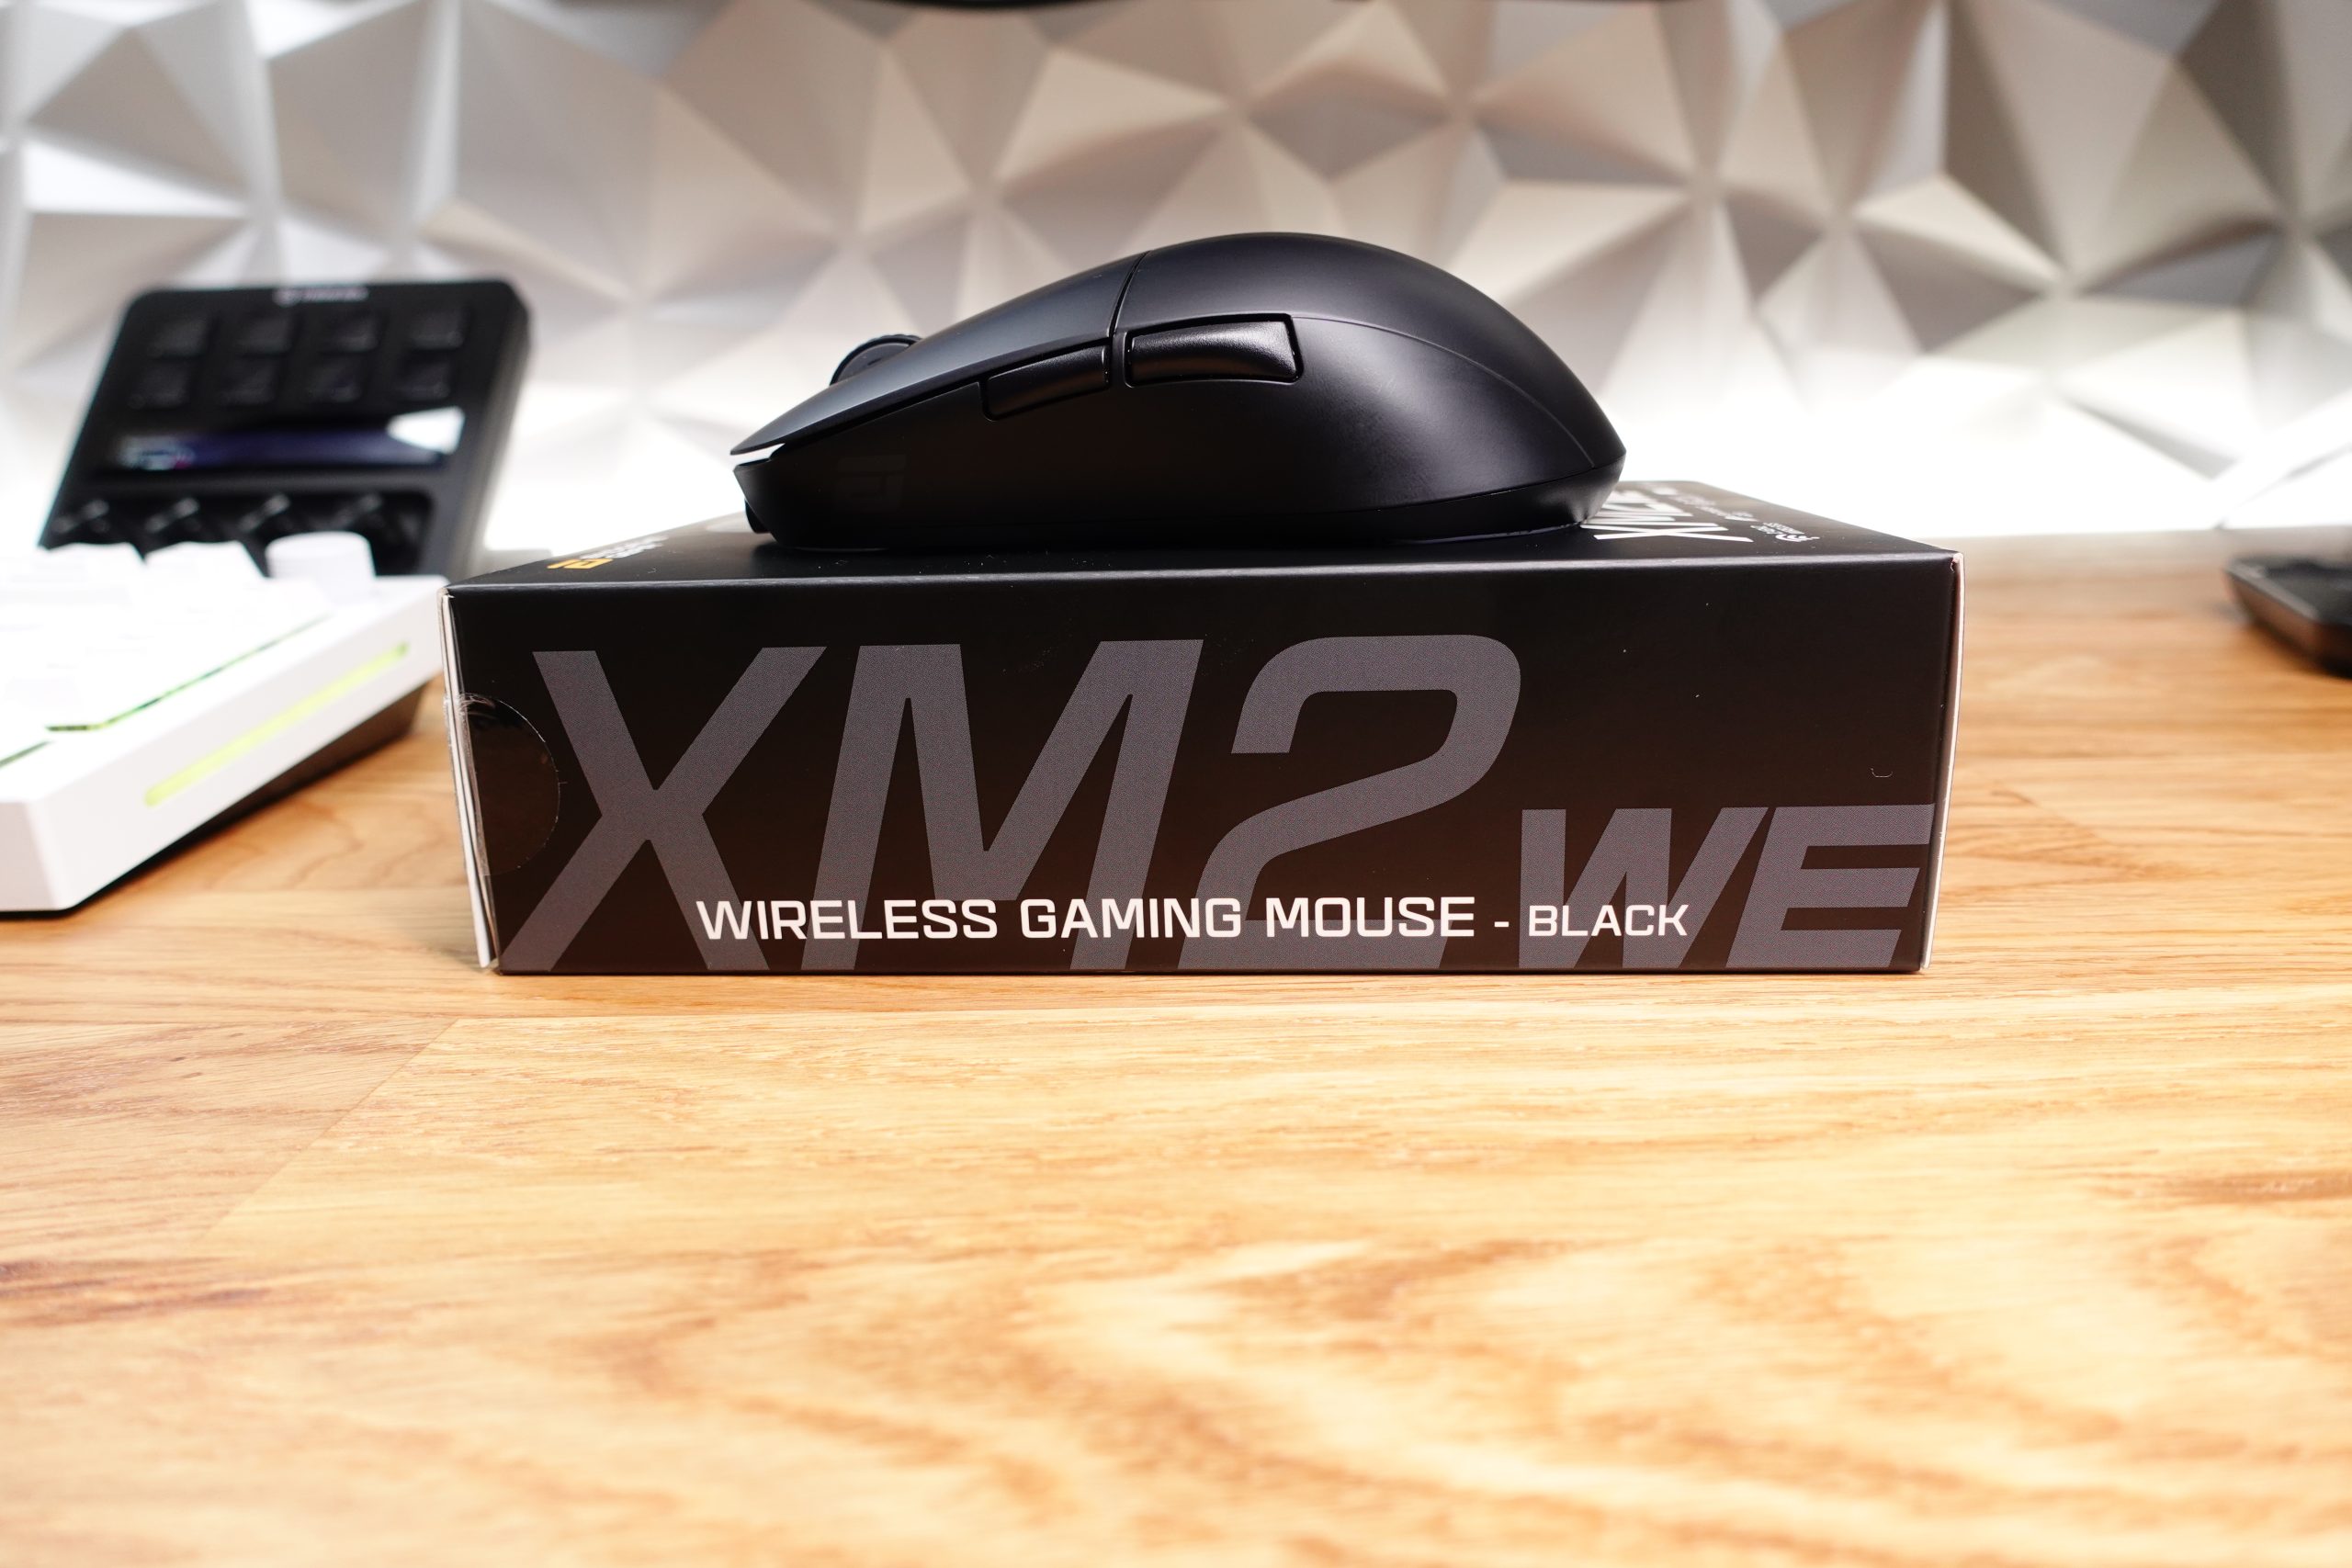 Endgame Gear XM2we Review - Packaging, Weight & Feet